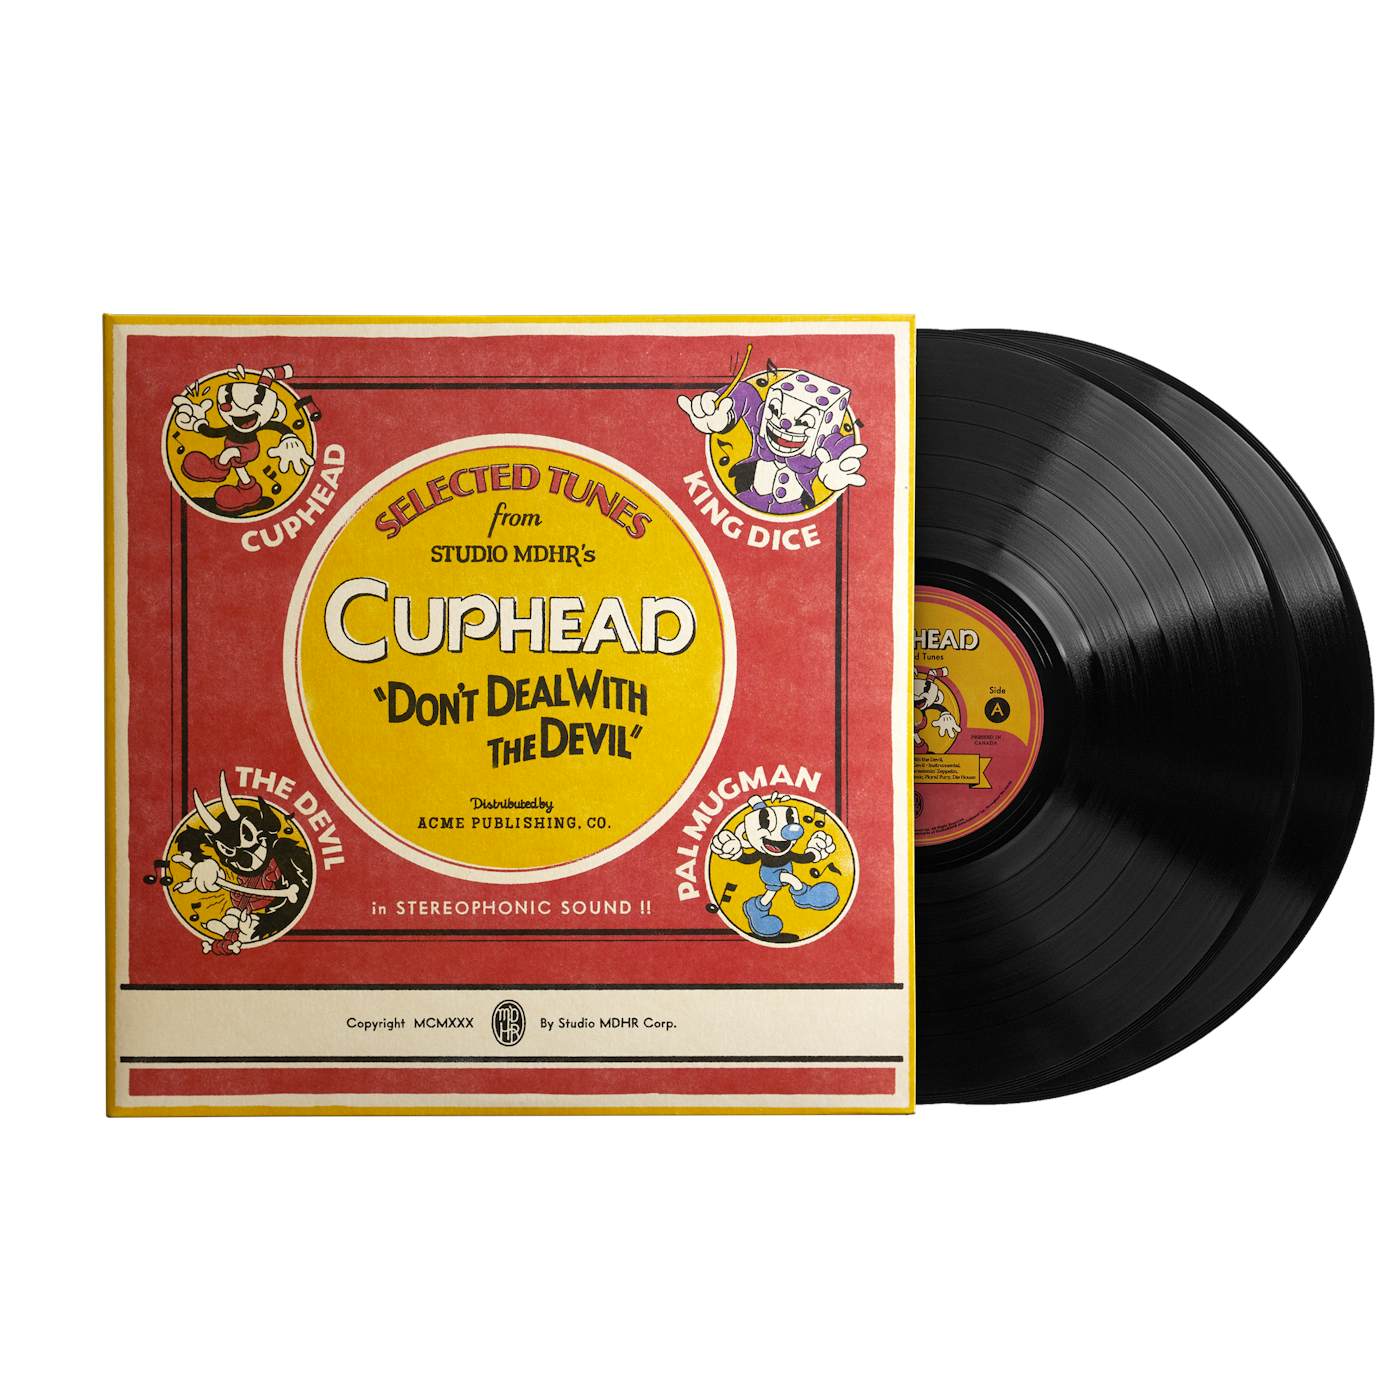 Kristofer Maddigan Cuphead: Don't Deal With the Devil: Selected Tunes From Studio MDHR's Cuphead (2xLP Vinyl Record)